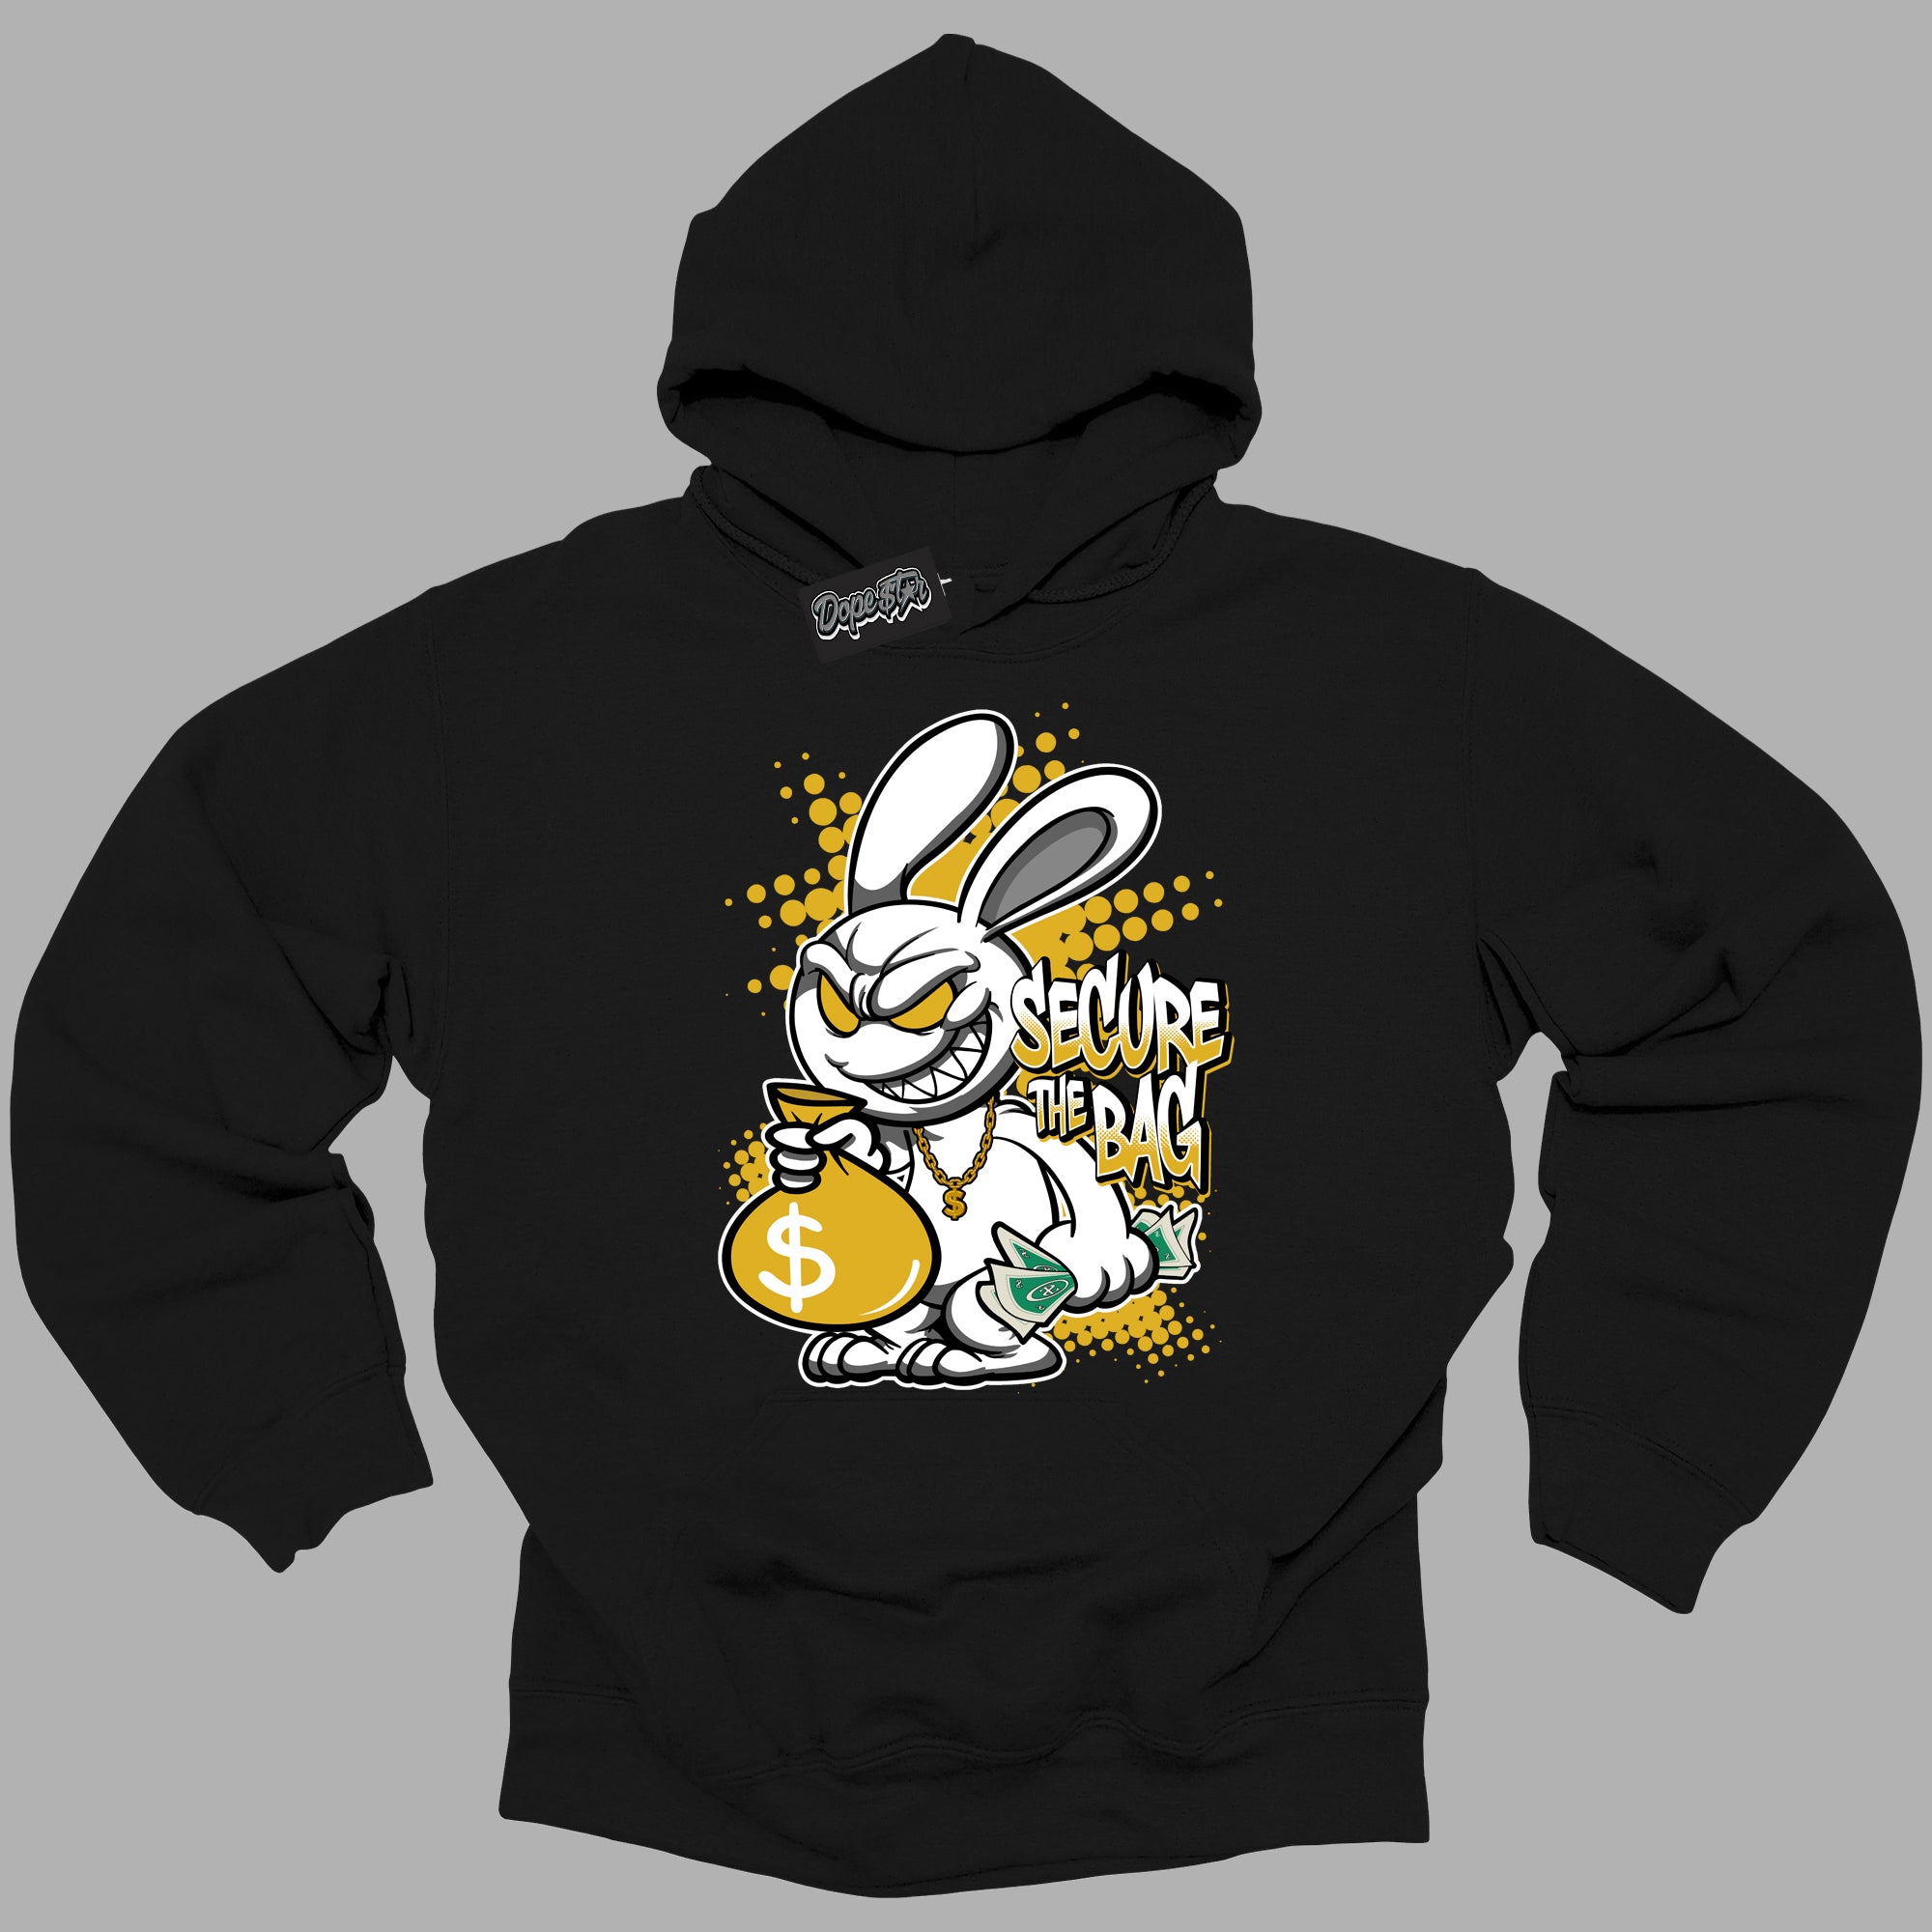 Cool Black Hoodie with “ Secure The Bag ”  design that Perfectly Matches Yellow Ochre 6s Sneakers.